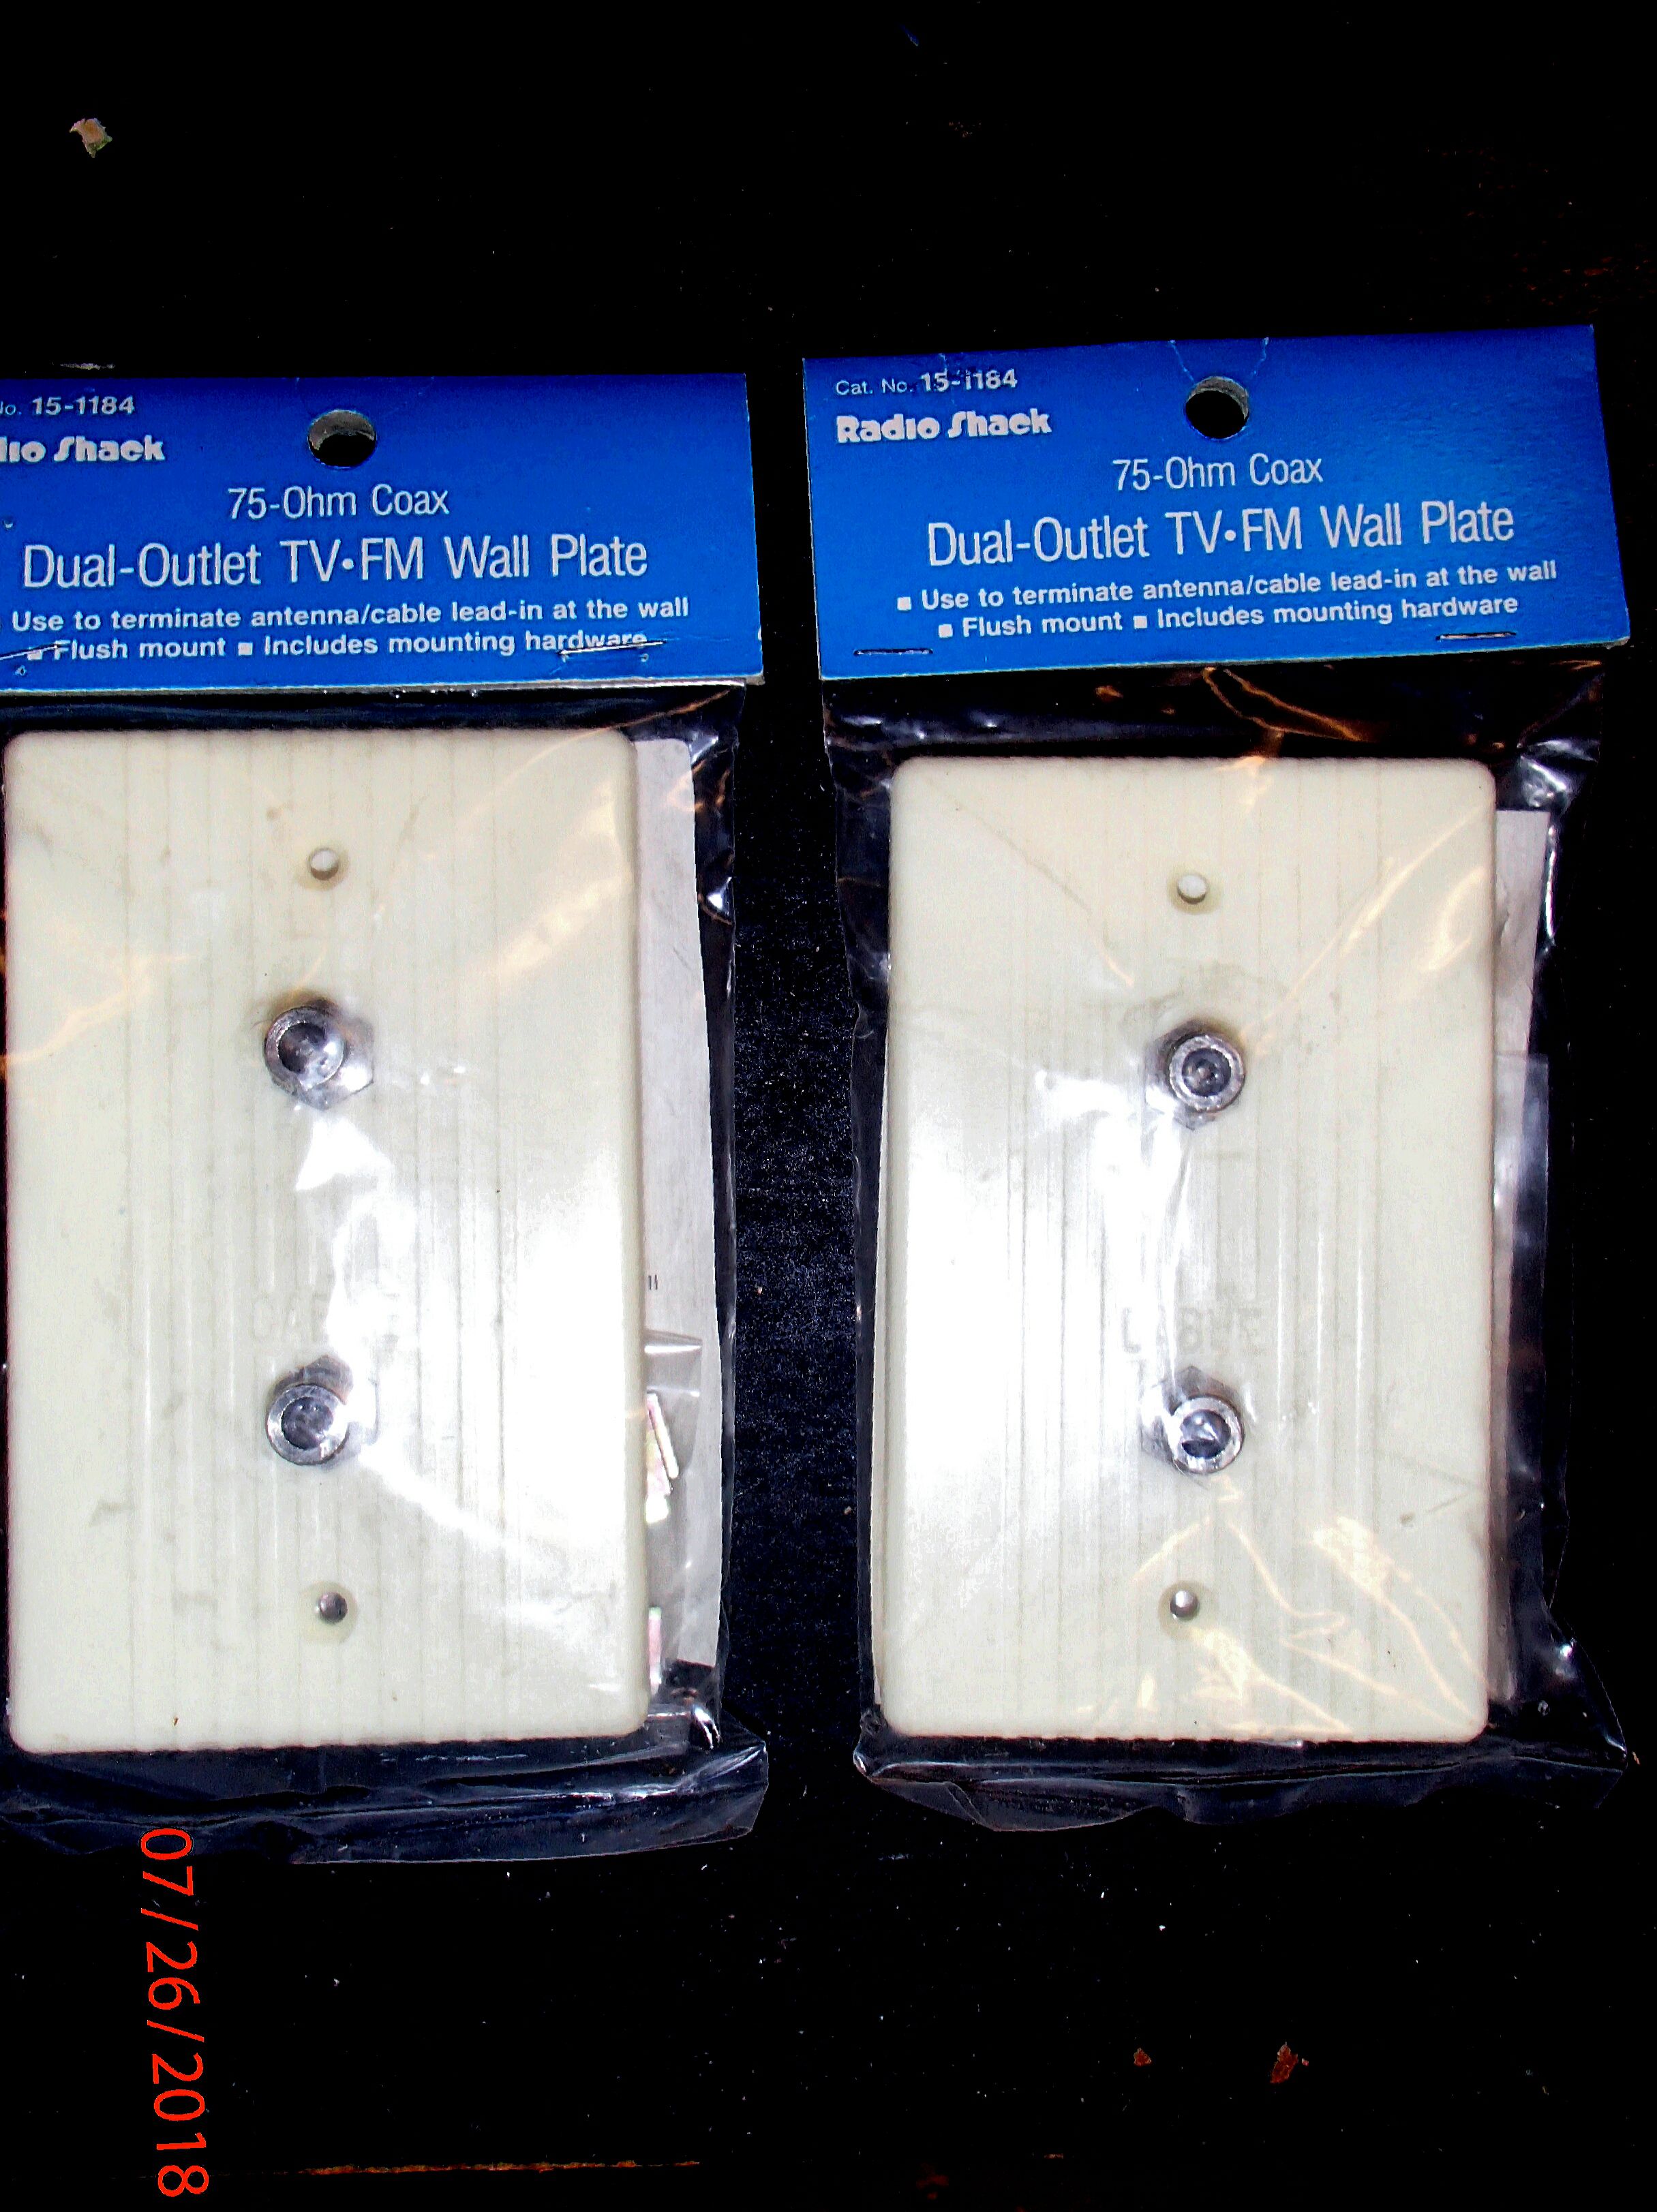 Double coax cable Jack wall outlet covers/plates $10 Cash Only